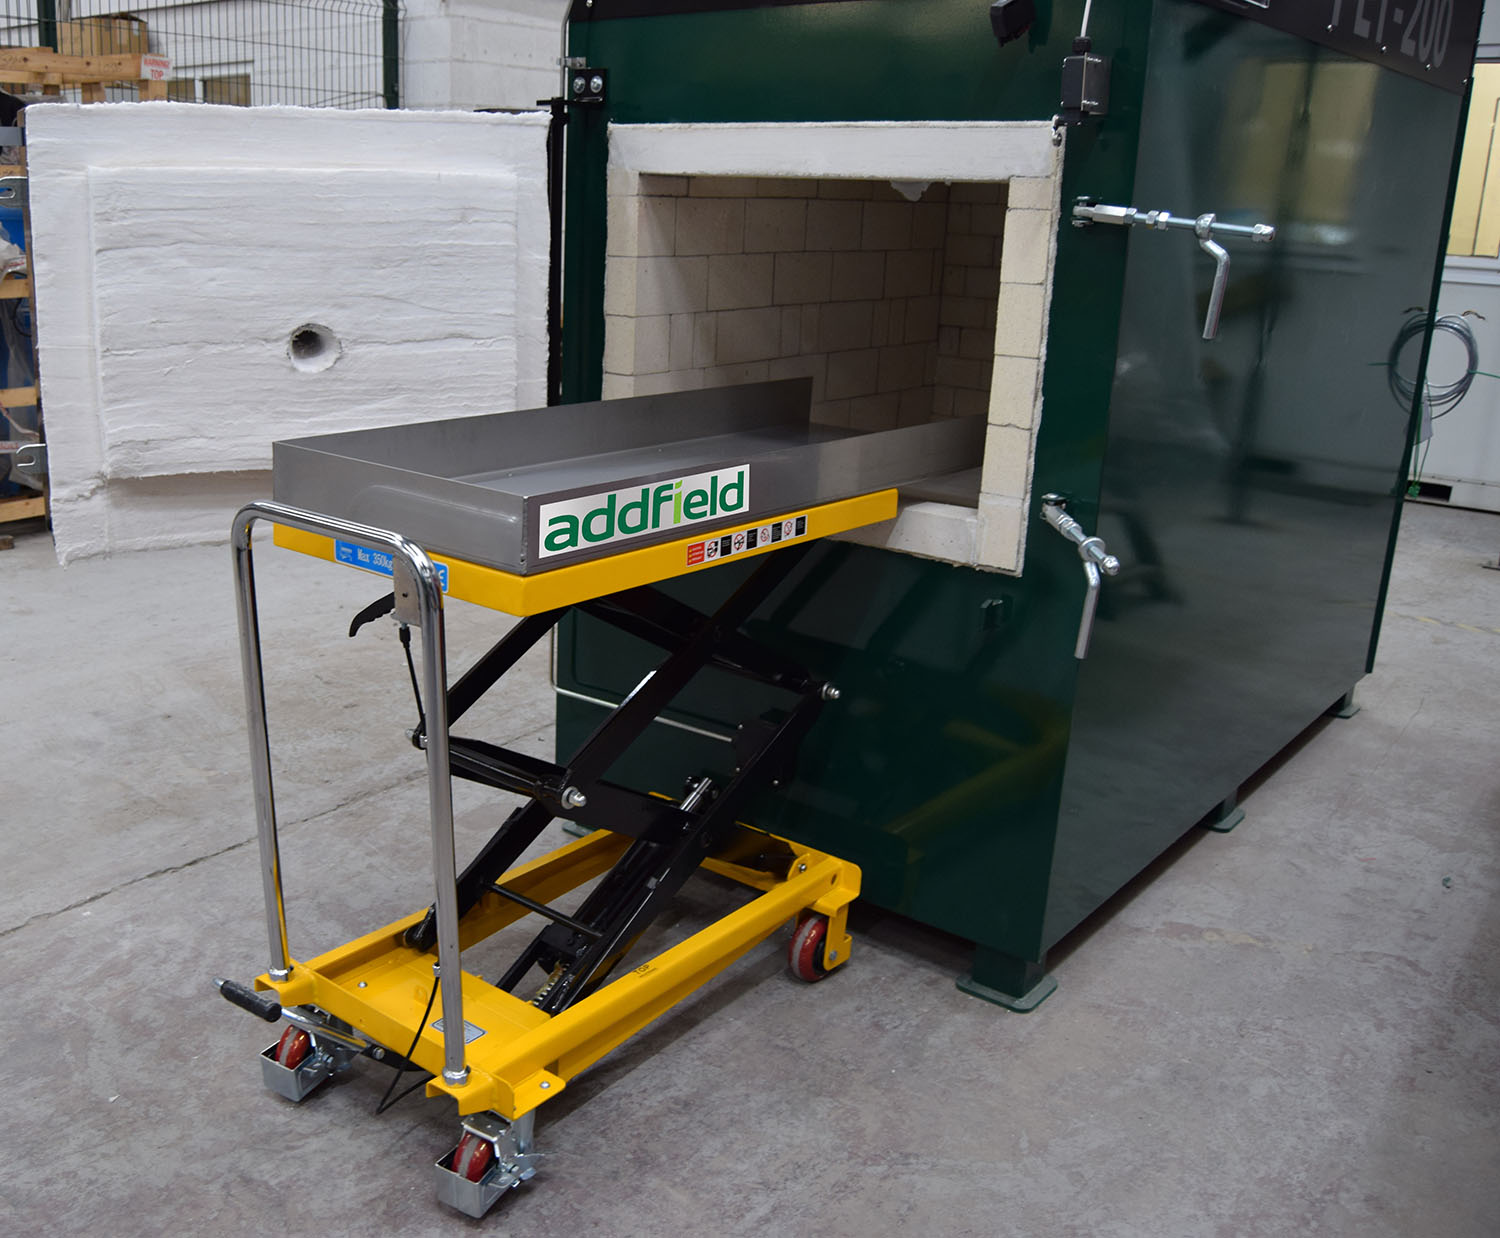 Pet 200 and lifting table placing a pet inside a cremator